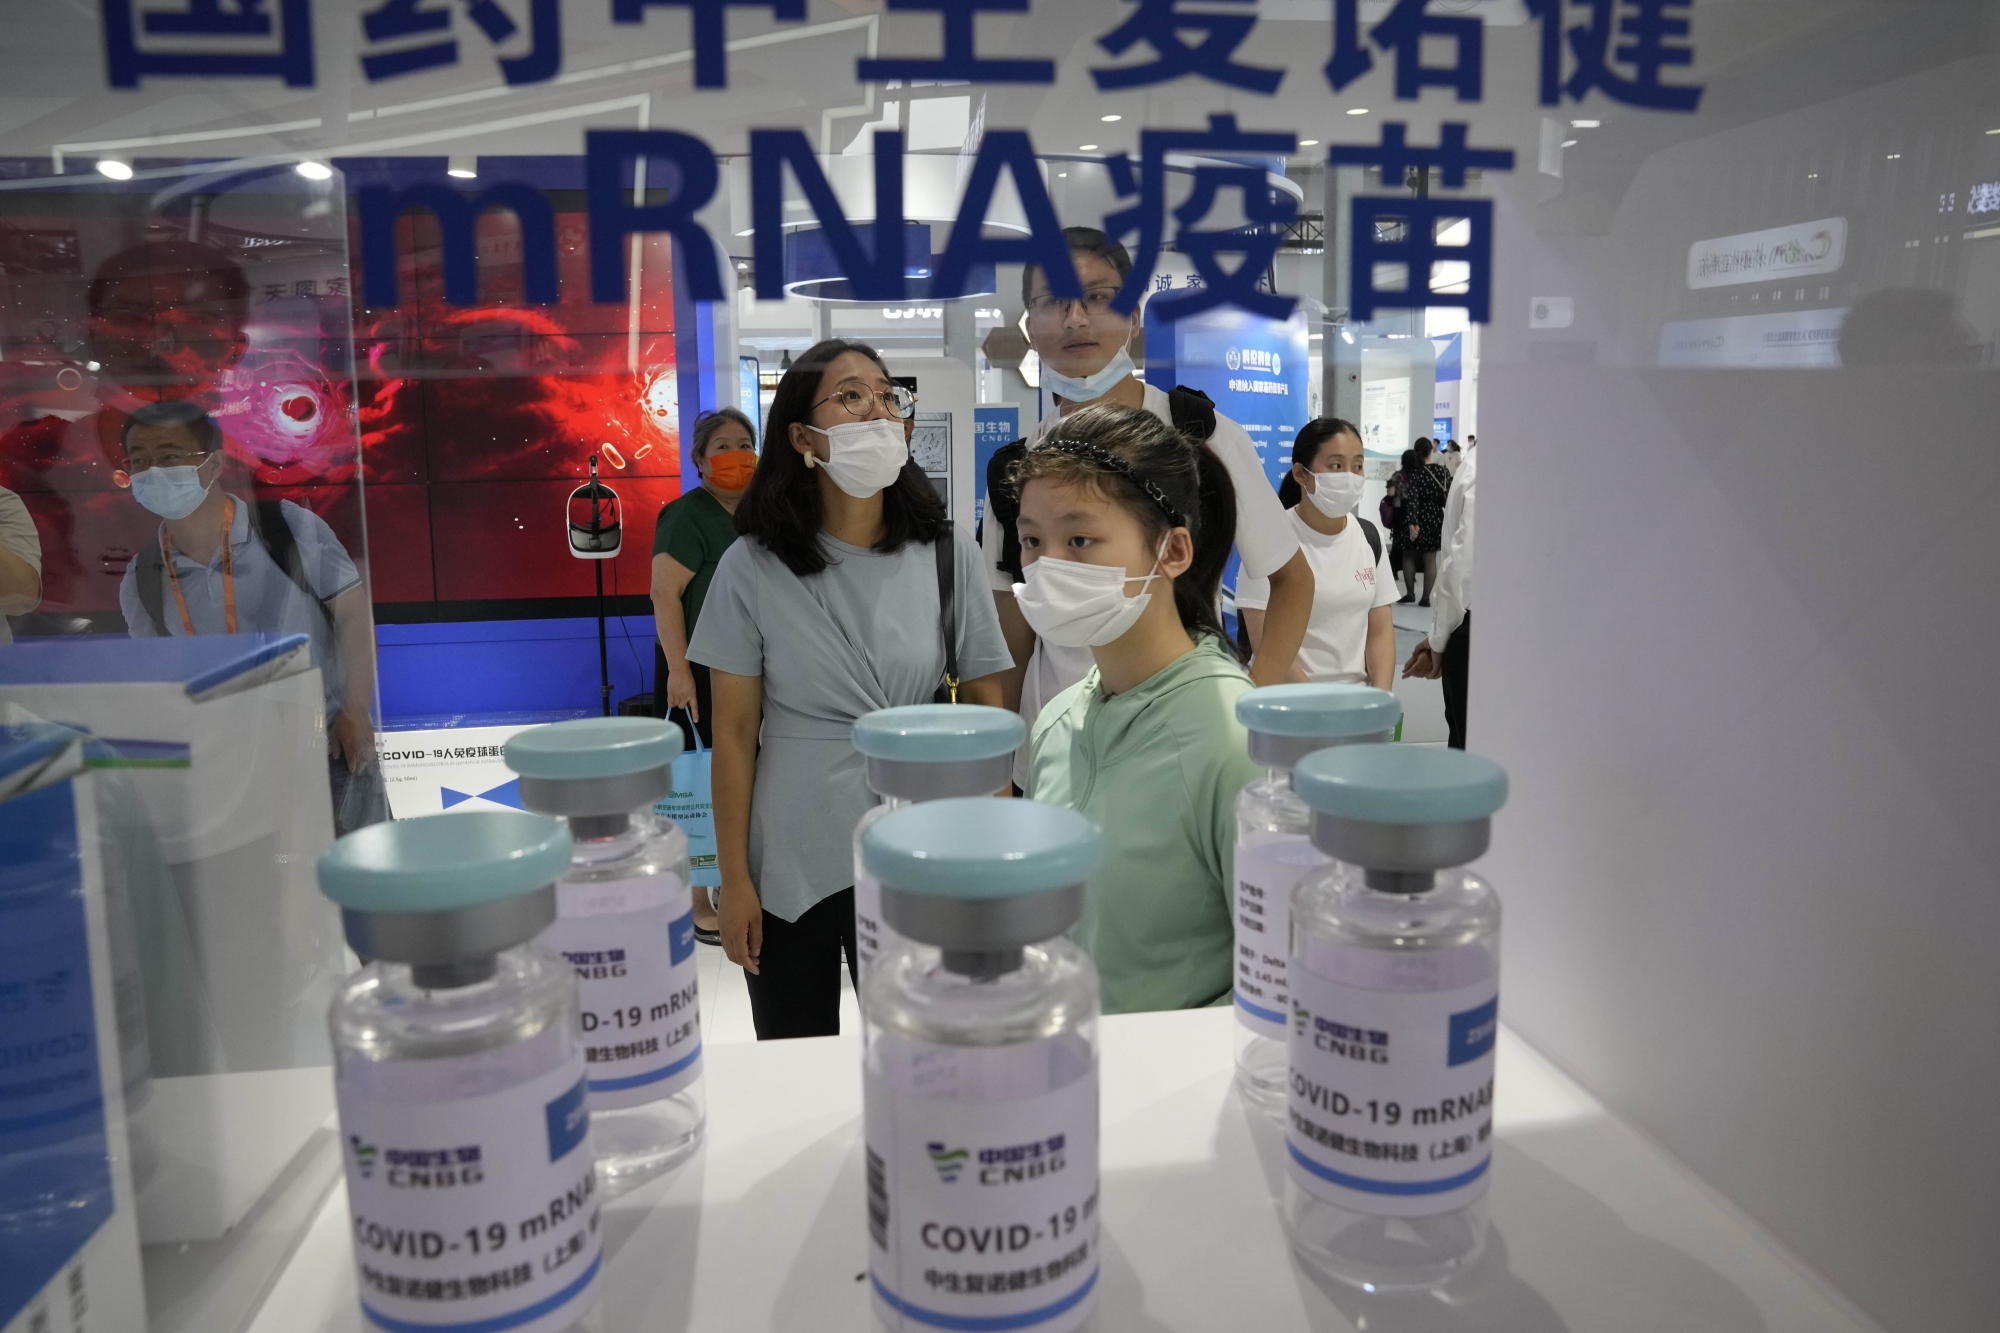 Visitors look at giant replica bottles of COVID-19 vaccine produced by Sinopharm subsidiary CNBG using mRNA technologies at the China International Fair for Trade in Services (CIFTIS) in Beijing, China on Sunday, Sept. 5, 2021. (AP Photo/Ng Han Guan)